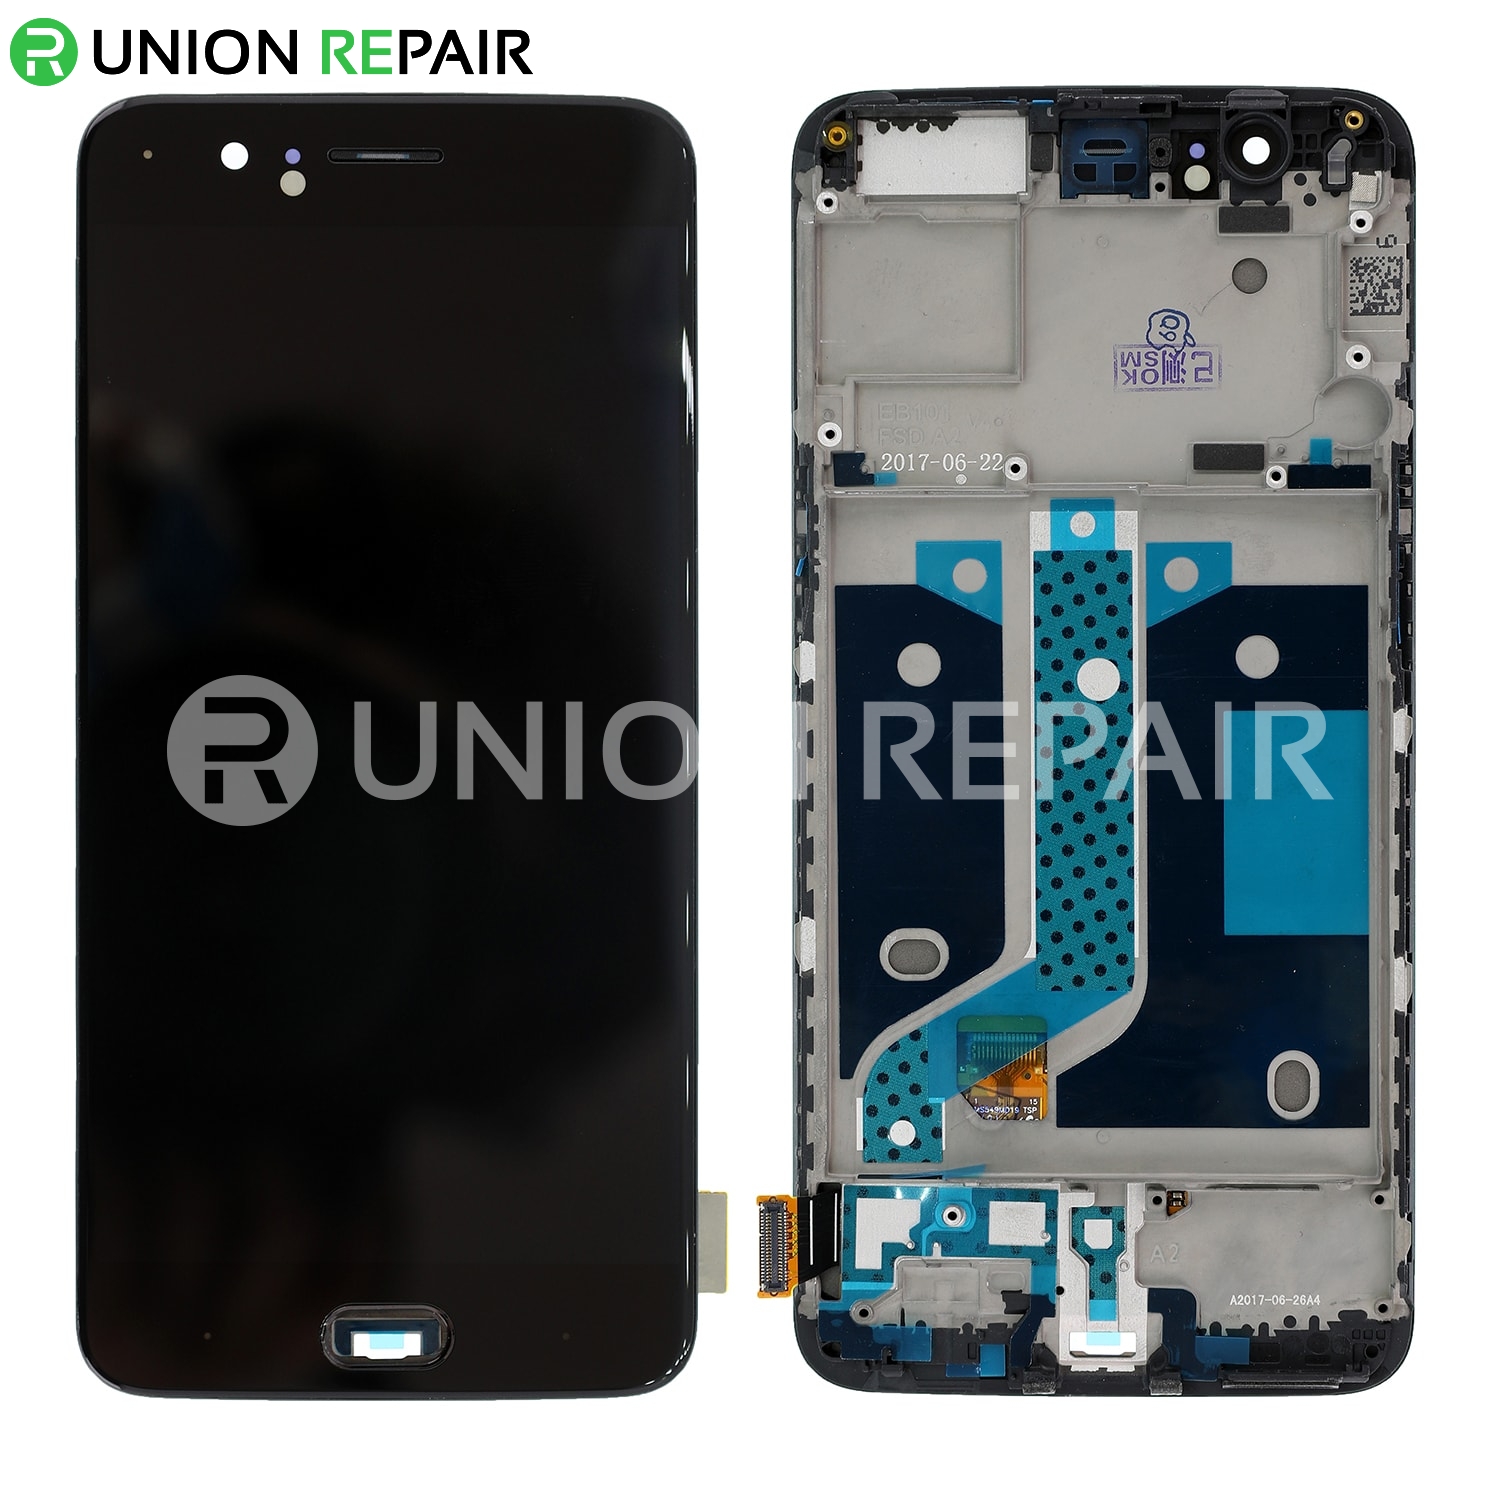 Replacement for OnePlus 5 LCD Screen Digitizer Assembly With Front Housing - Black